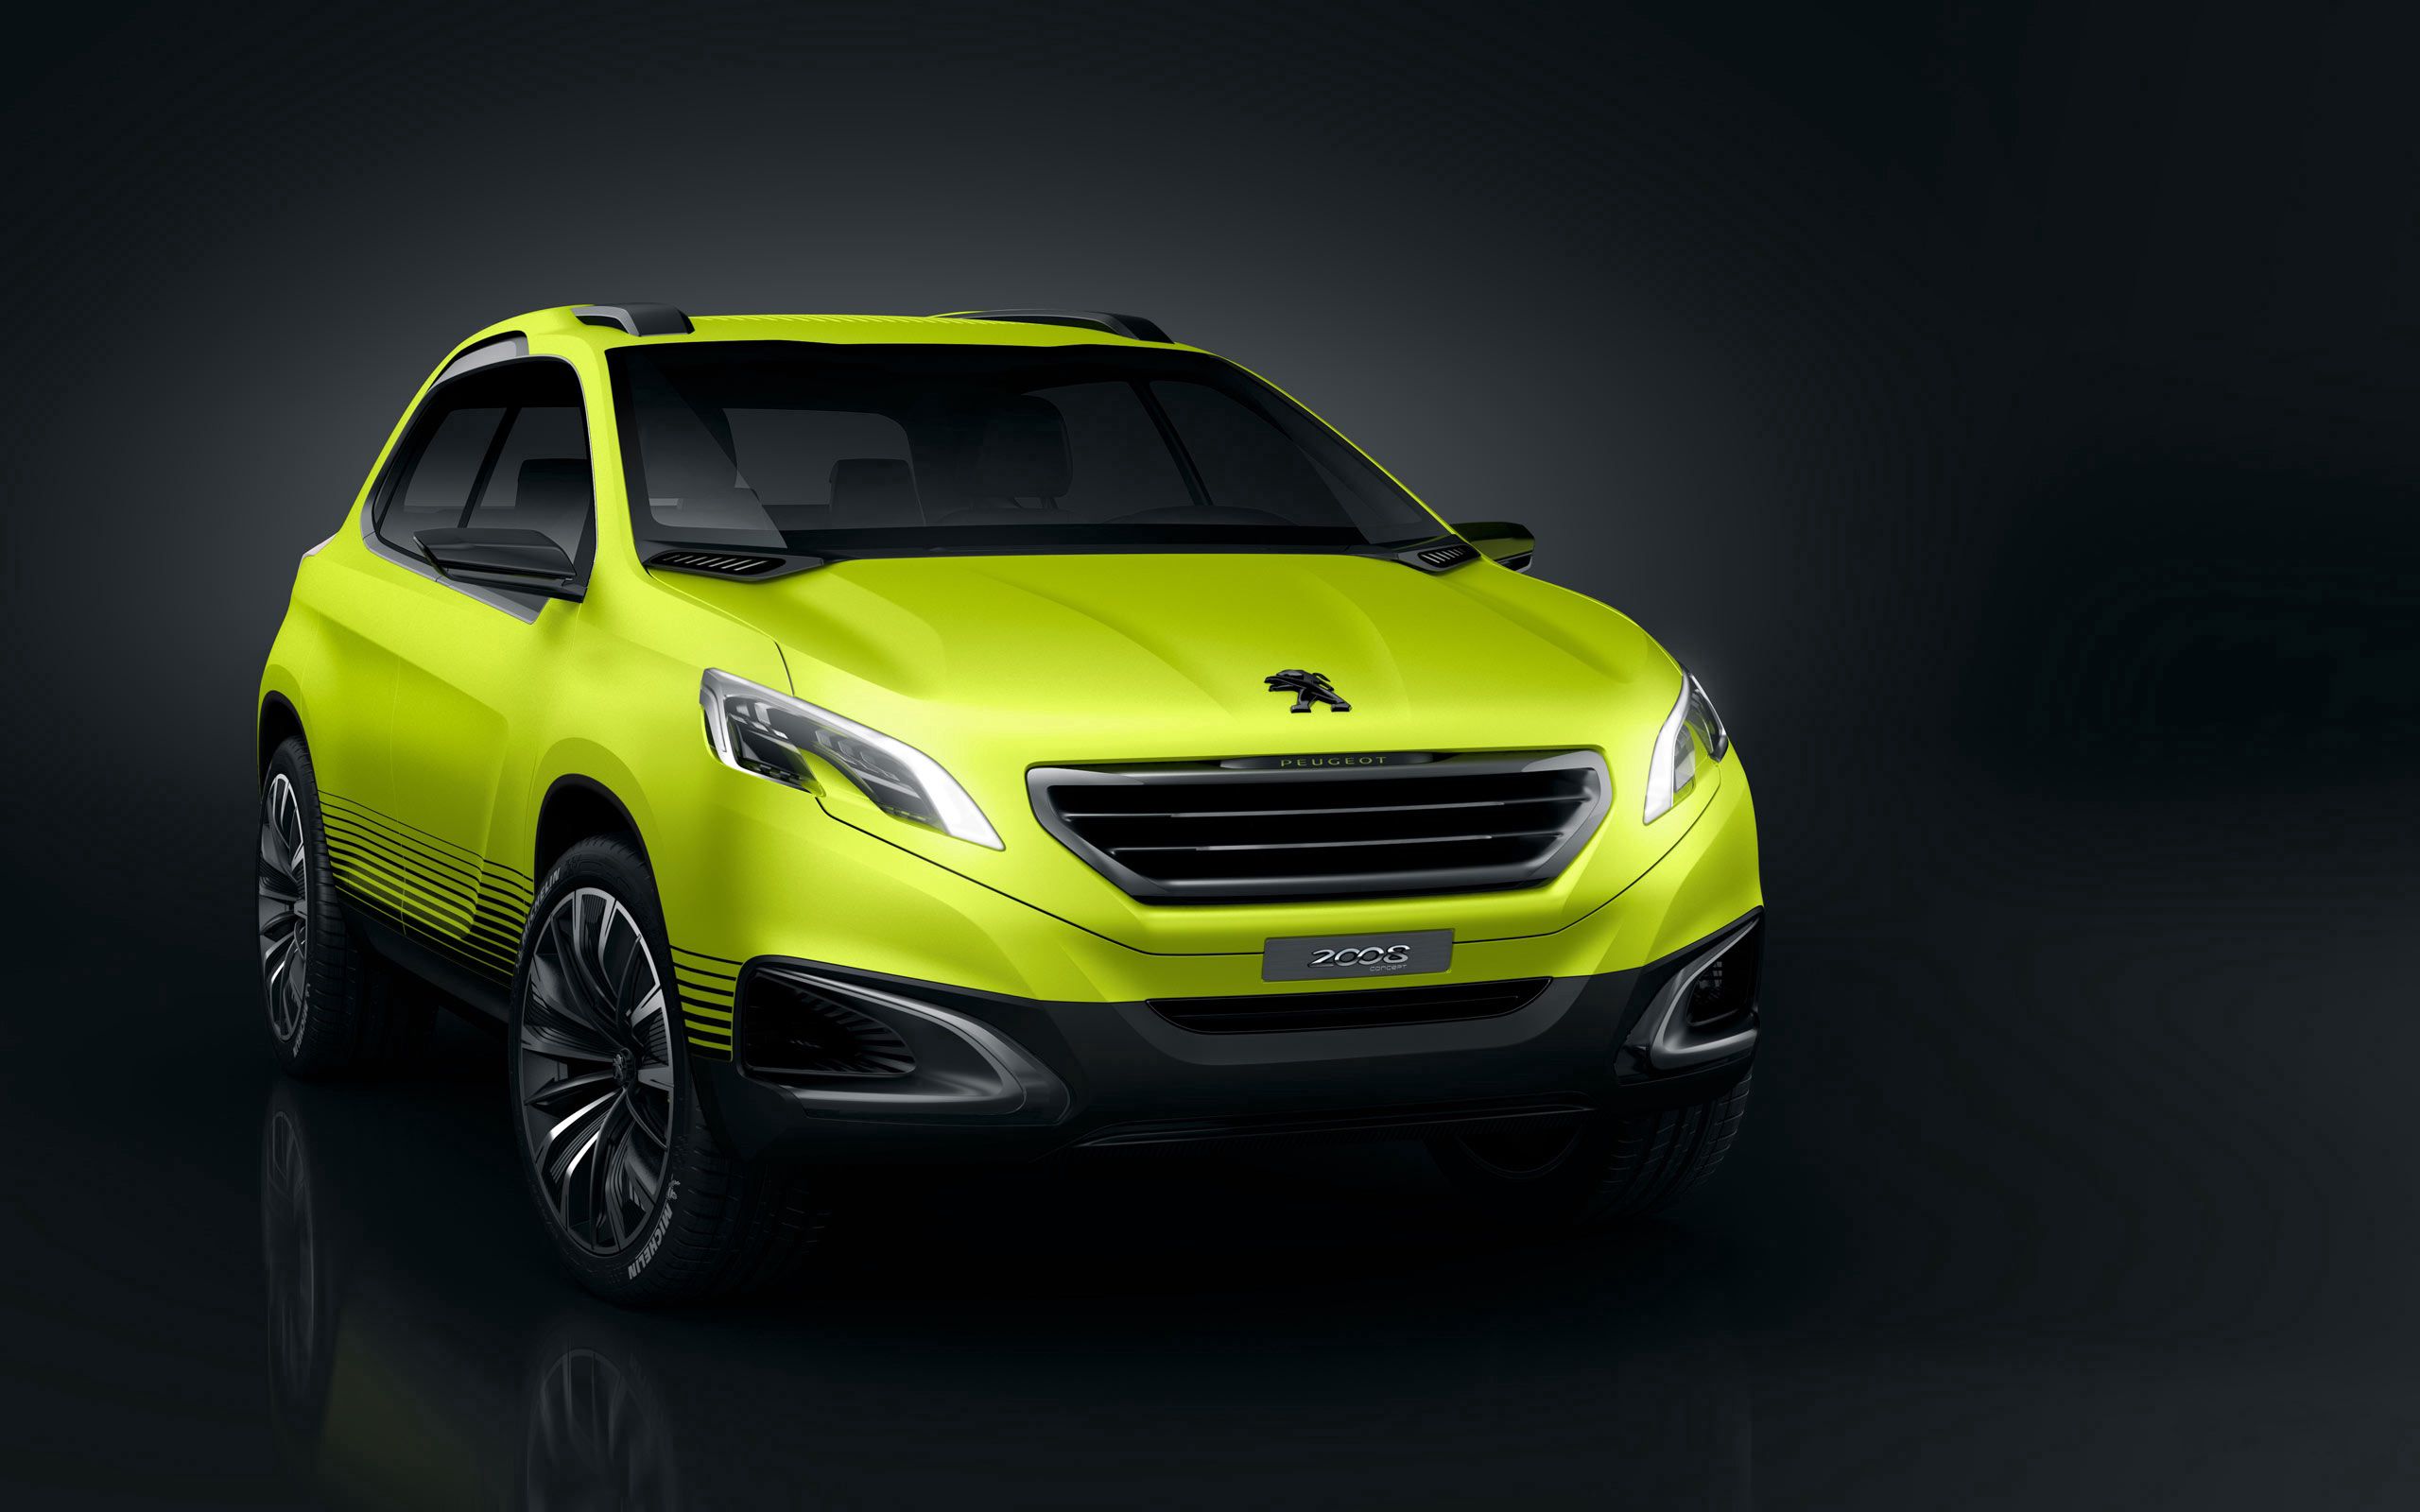 68845 download wallpaper peugeot, cars, front view, peugeot 2008 screensavers and pictures for free